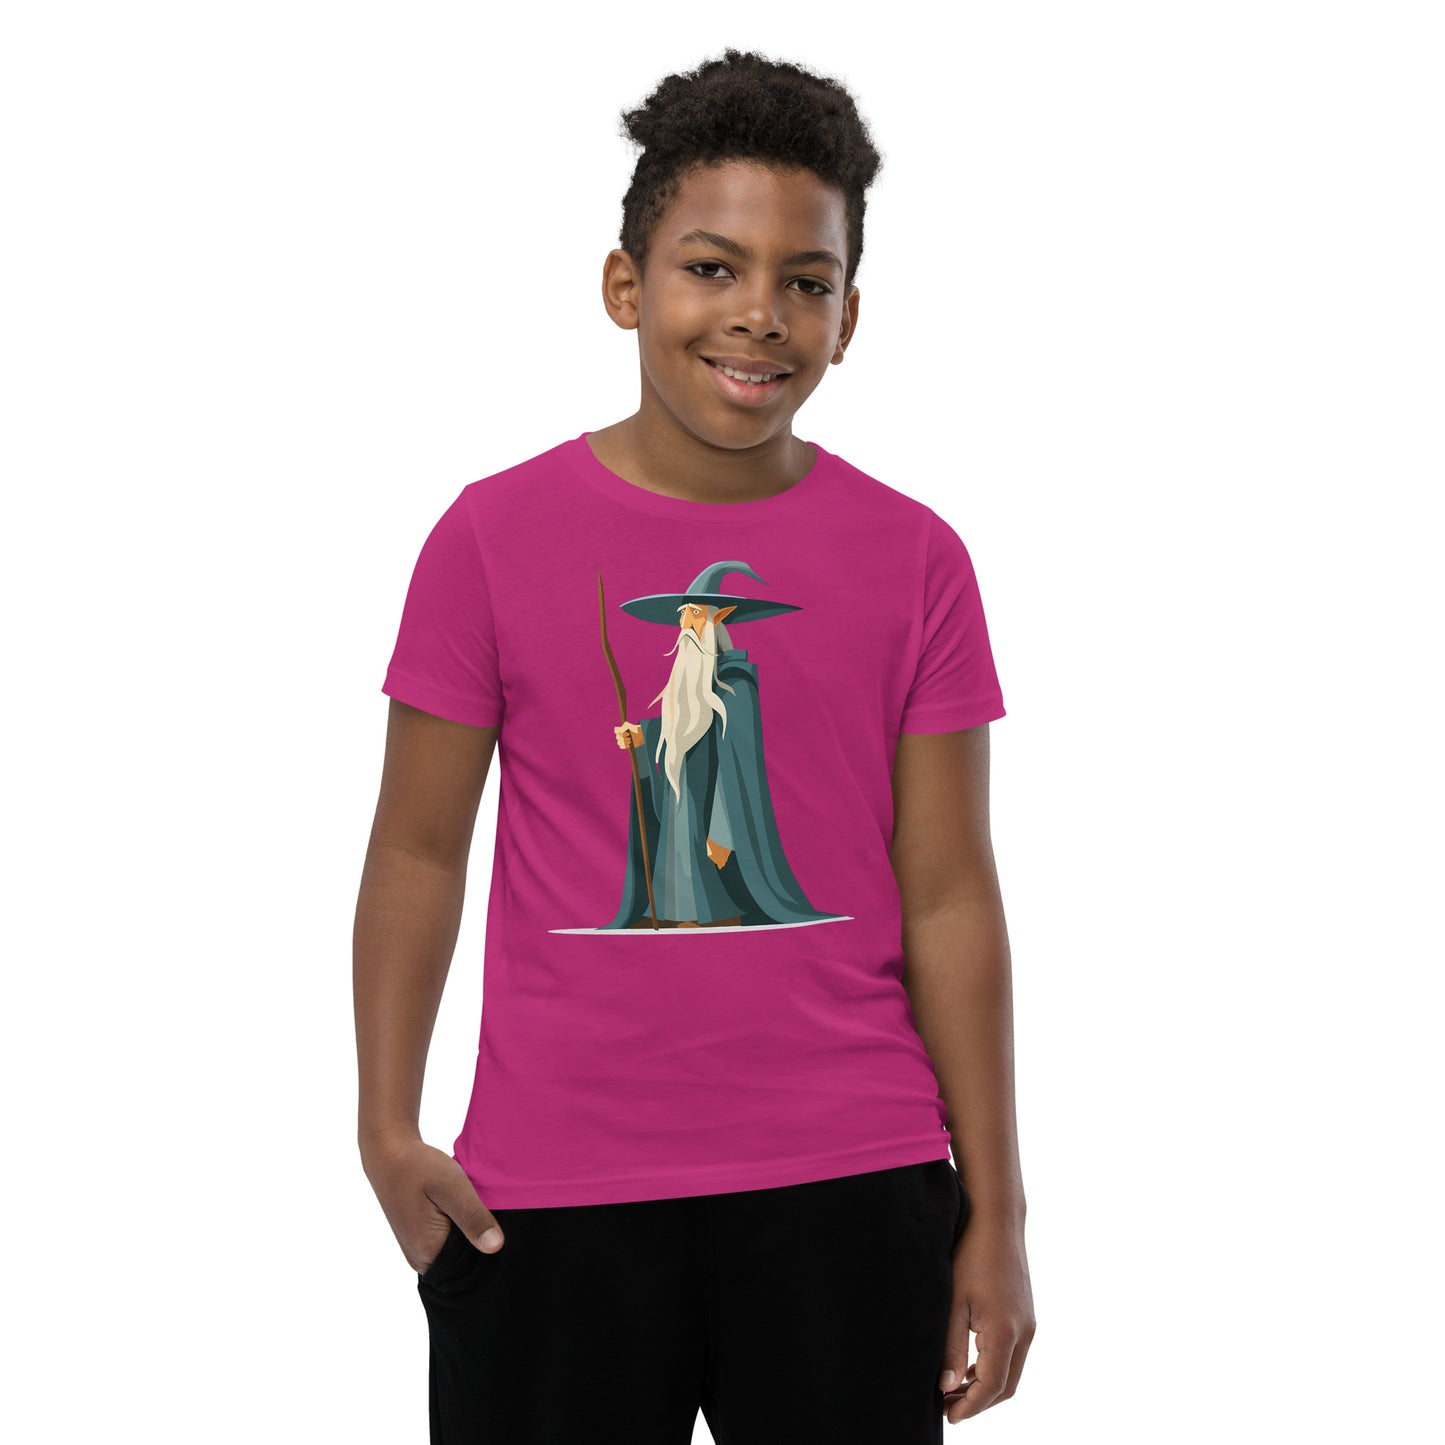 Boy with a berry T-shirt with a picture of a magician